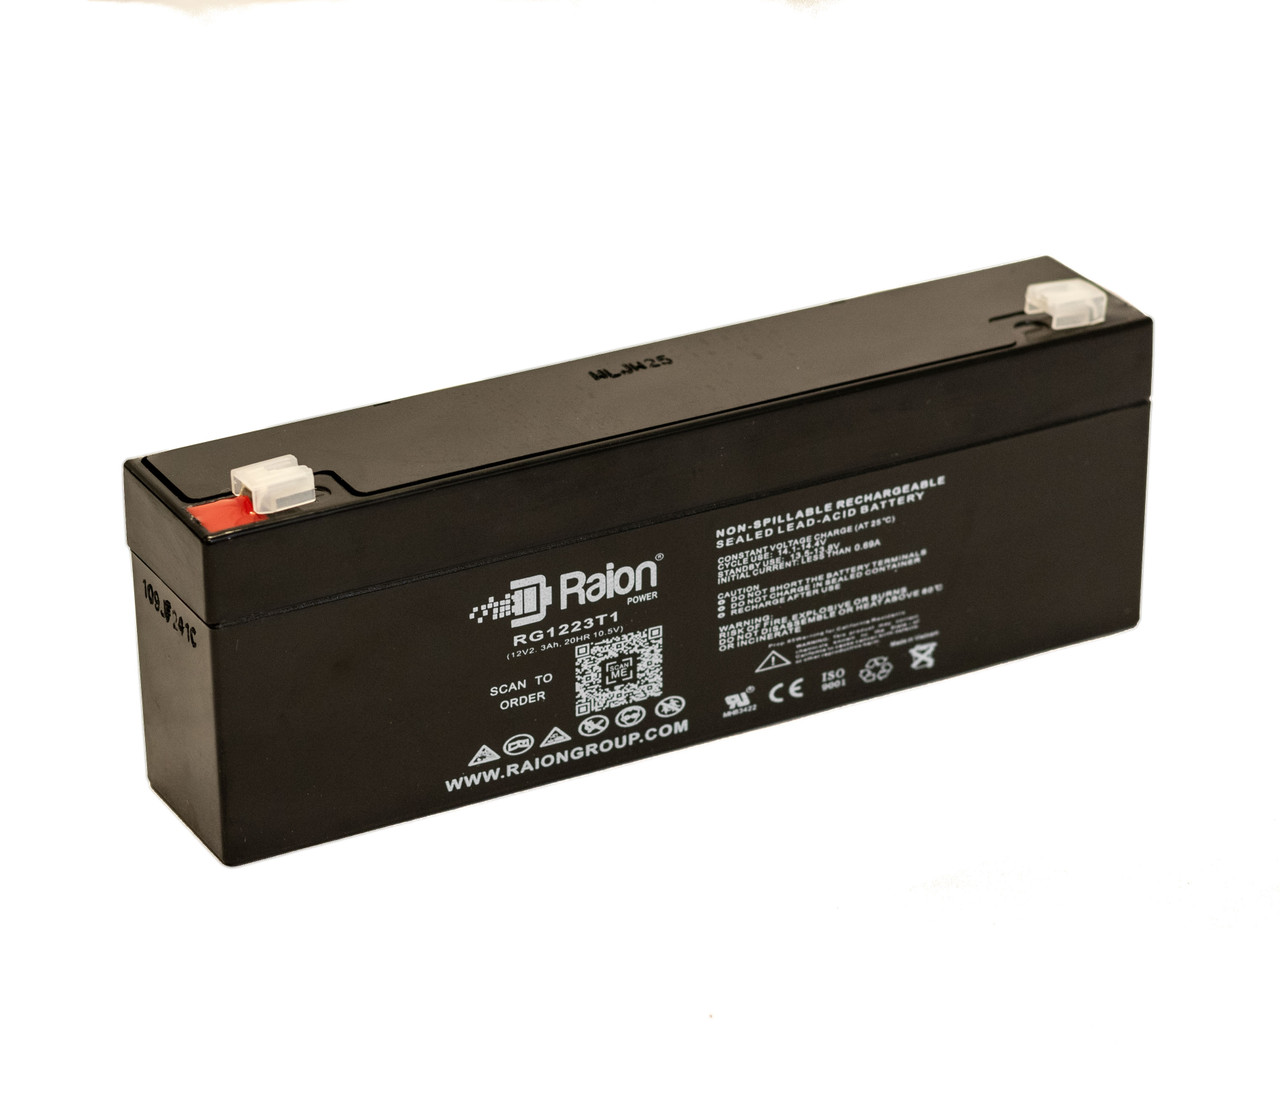 Raion Power RG1223T1 Replacement Battery for Aspen Labs 1500 ATS